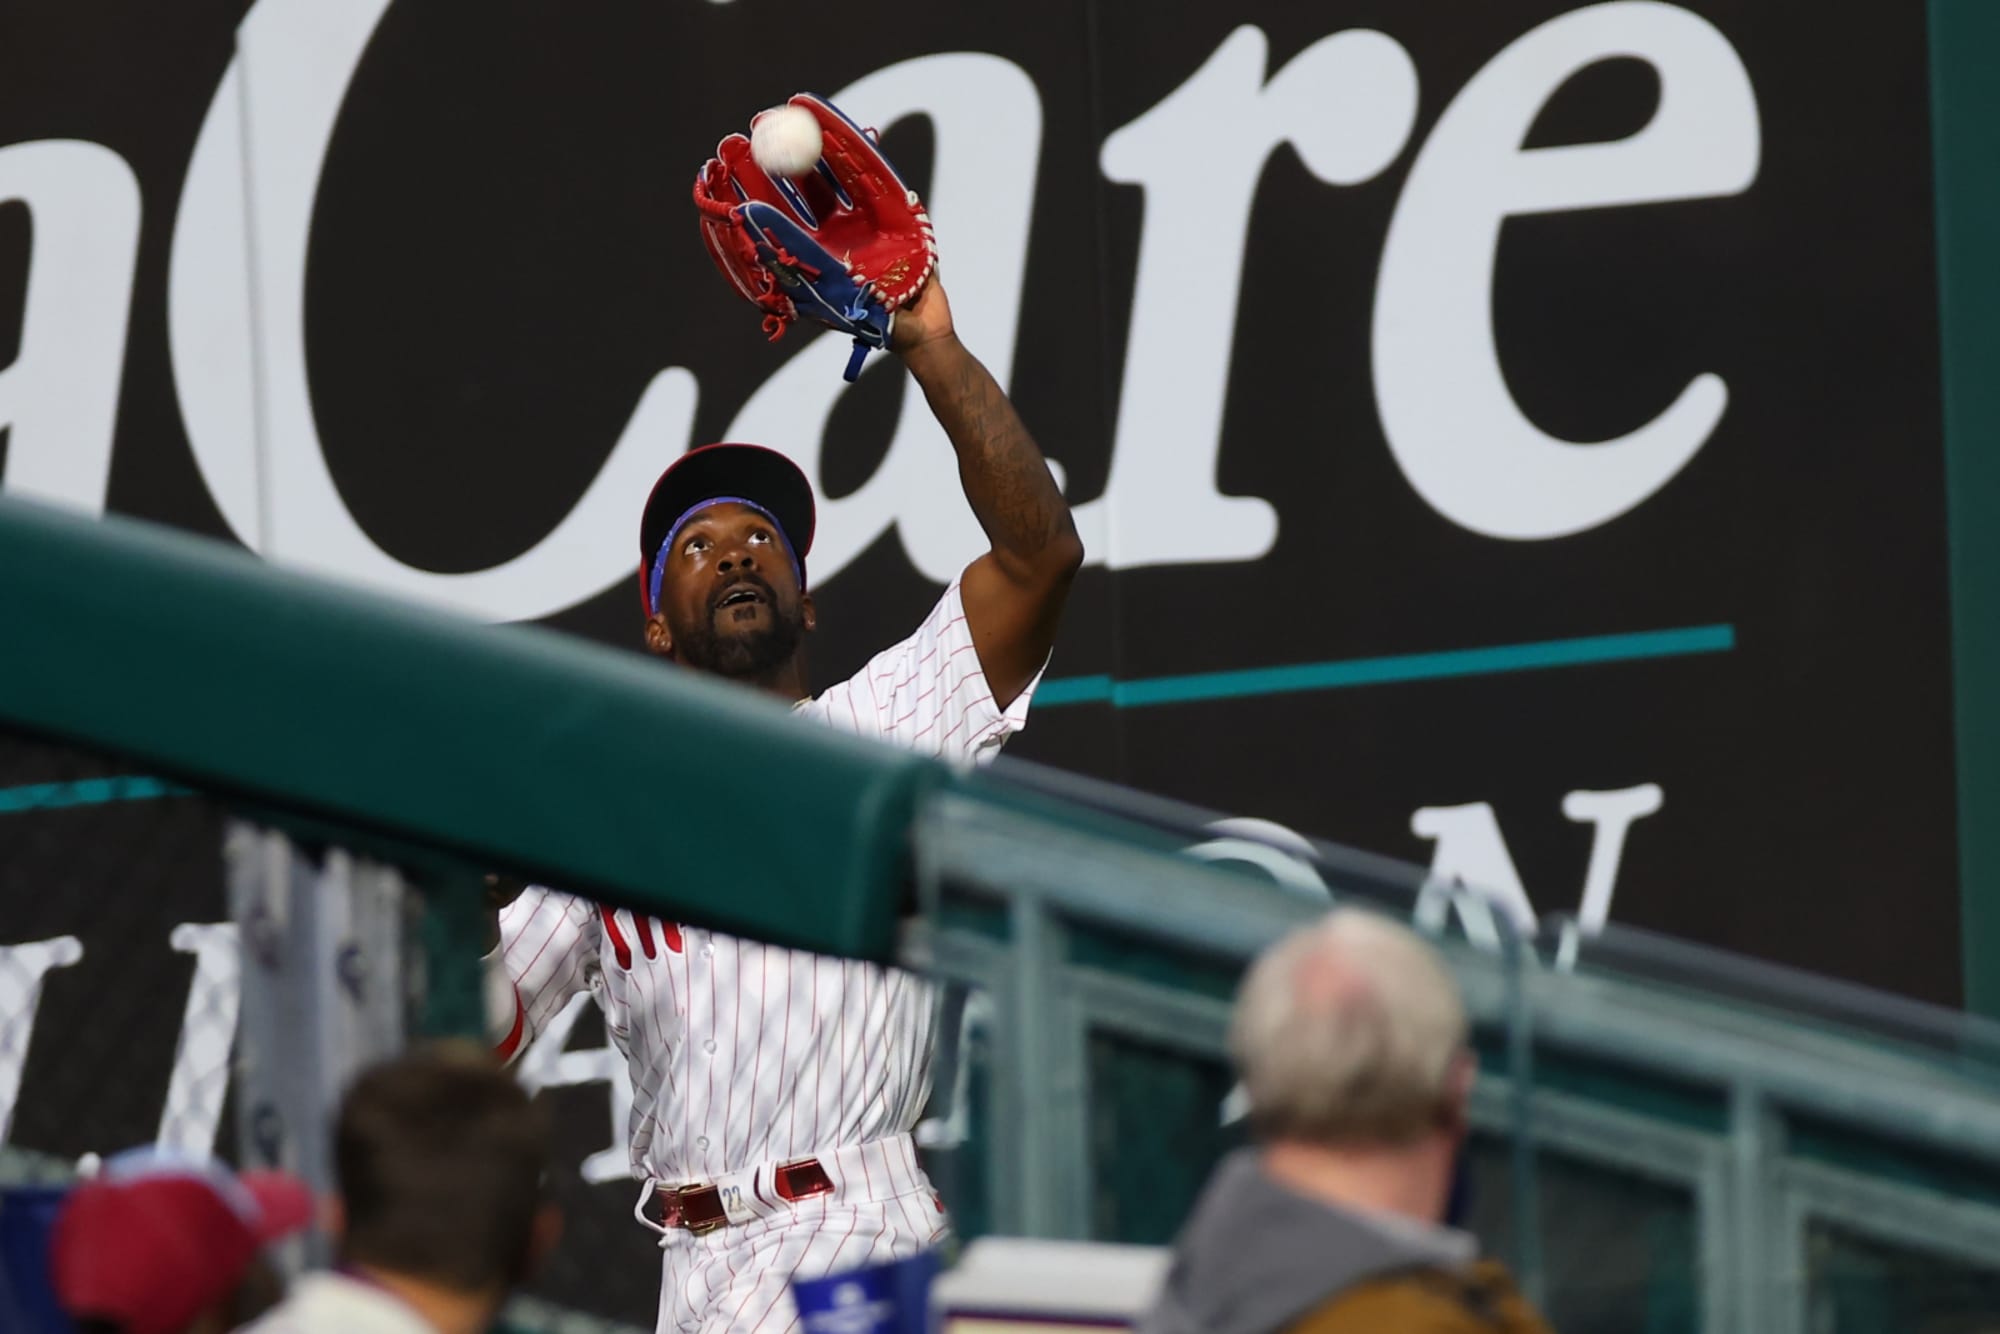 Phillies' Andrew McCutchen out for season with torn ACL